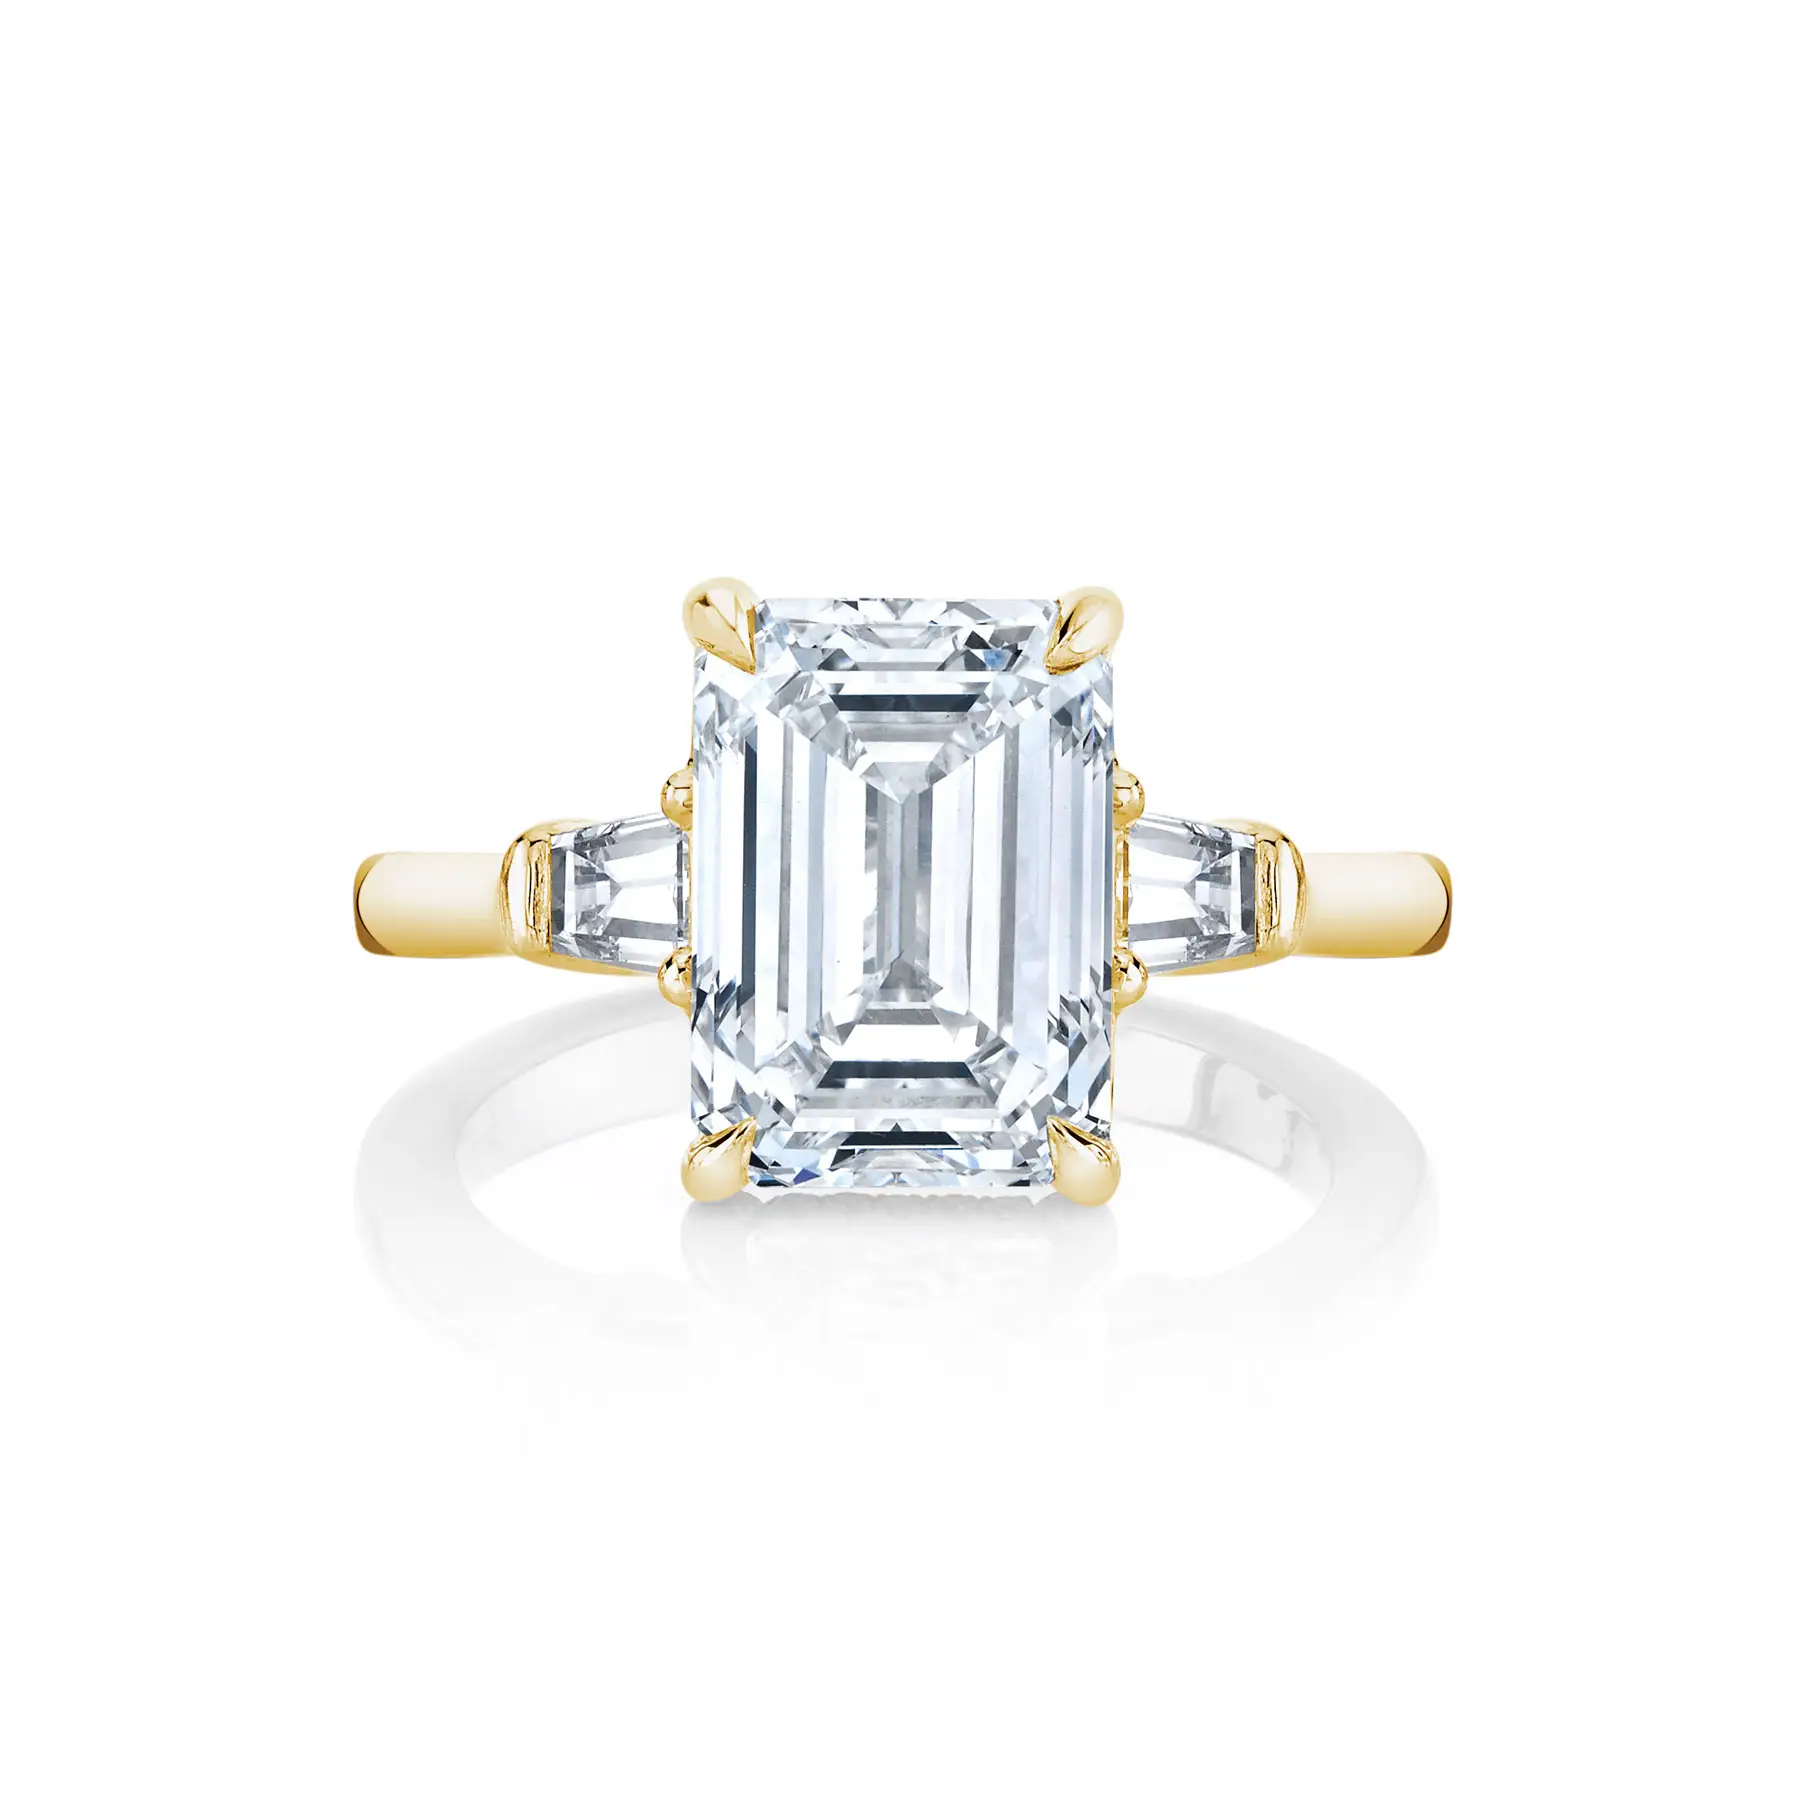 3 Stones Jewelry Wedding Engagement Rings Emerald Cut Moissanite Ring 9K/10K/14K/18K Yellow Gold Solid Jewelry